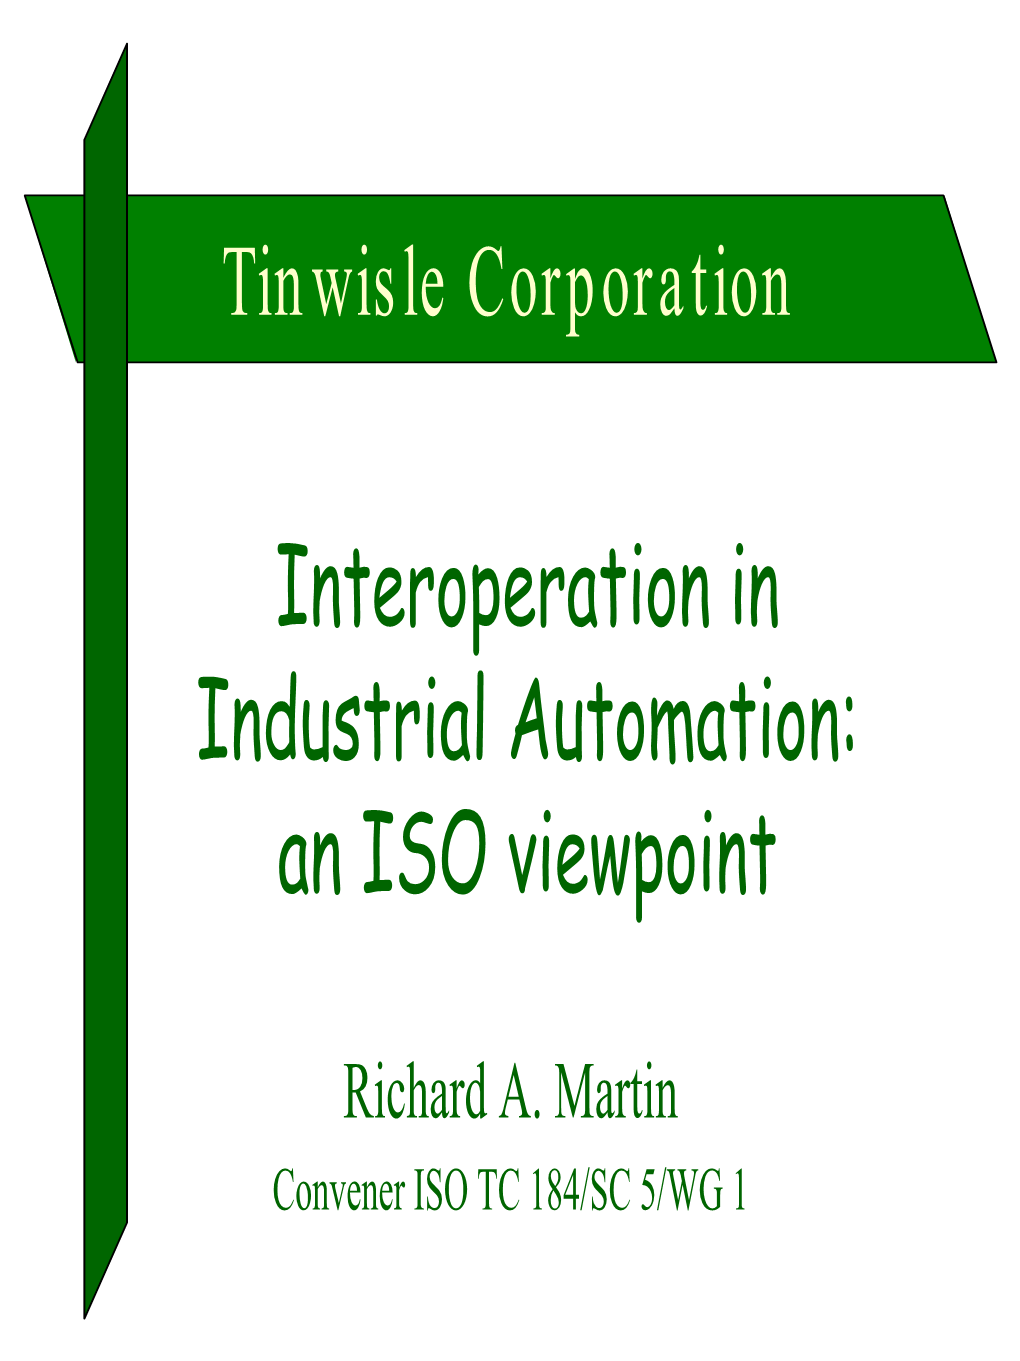 Interoperation in Industrial Automation: an ISO Viewpoint